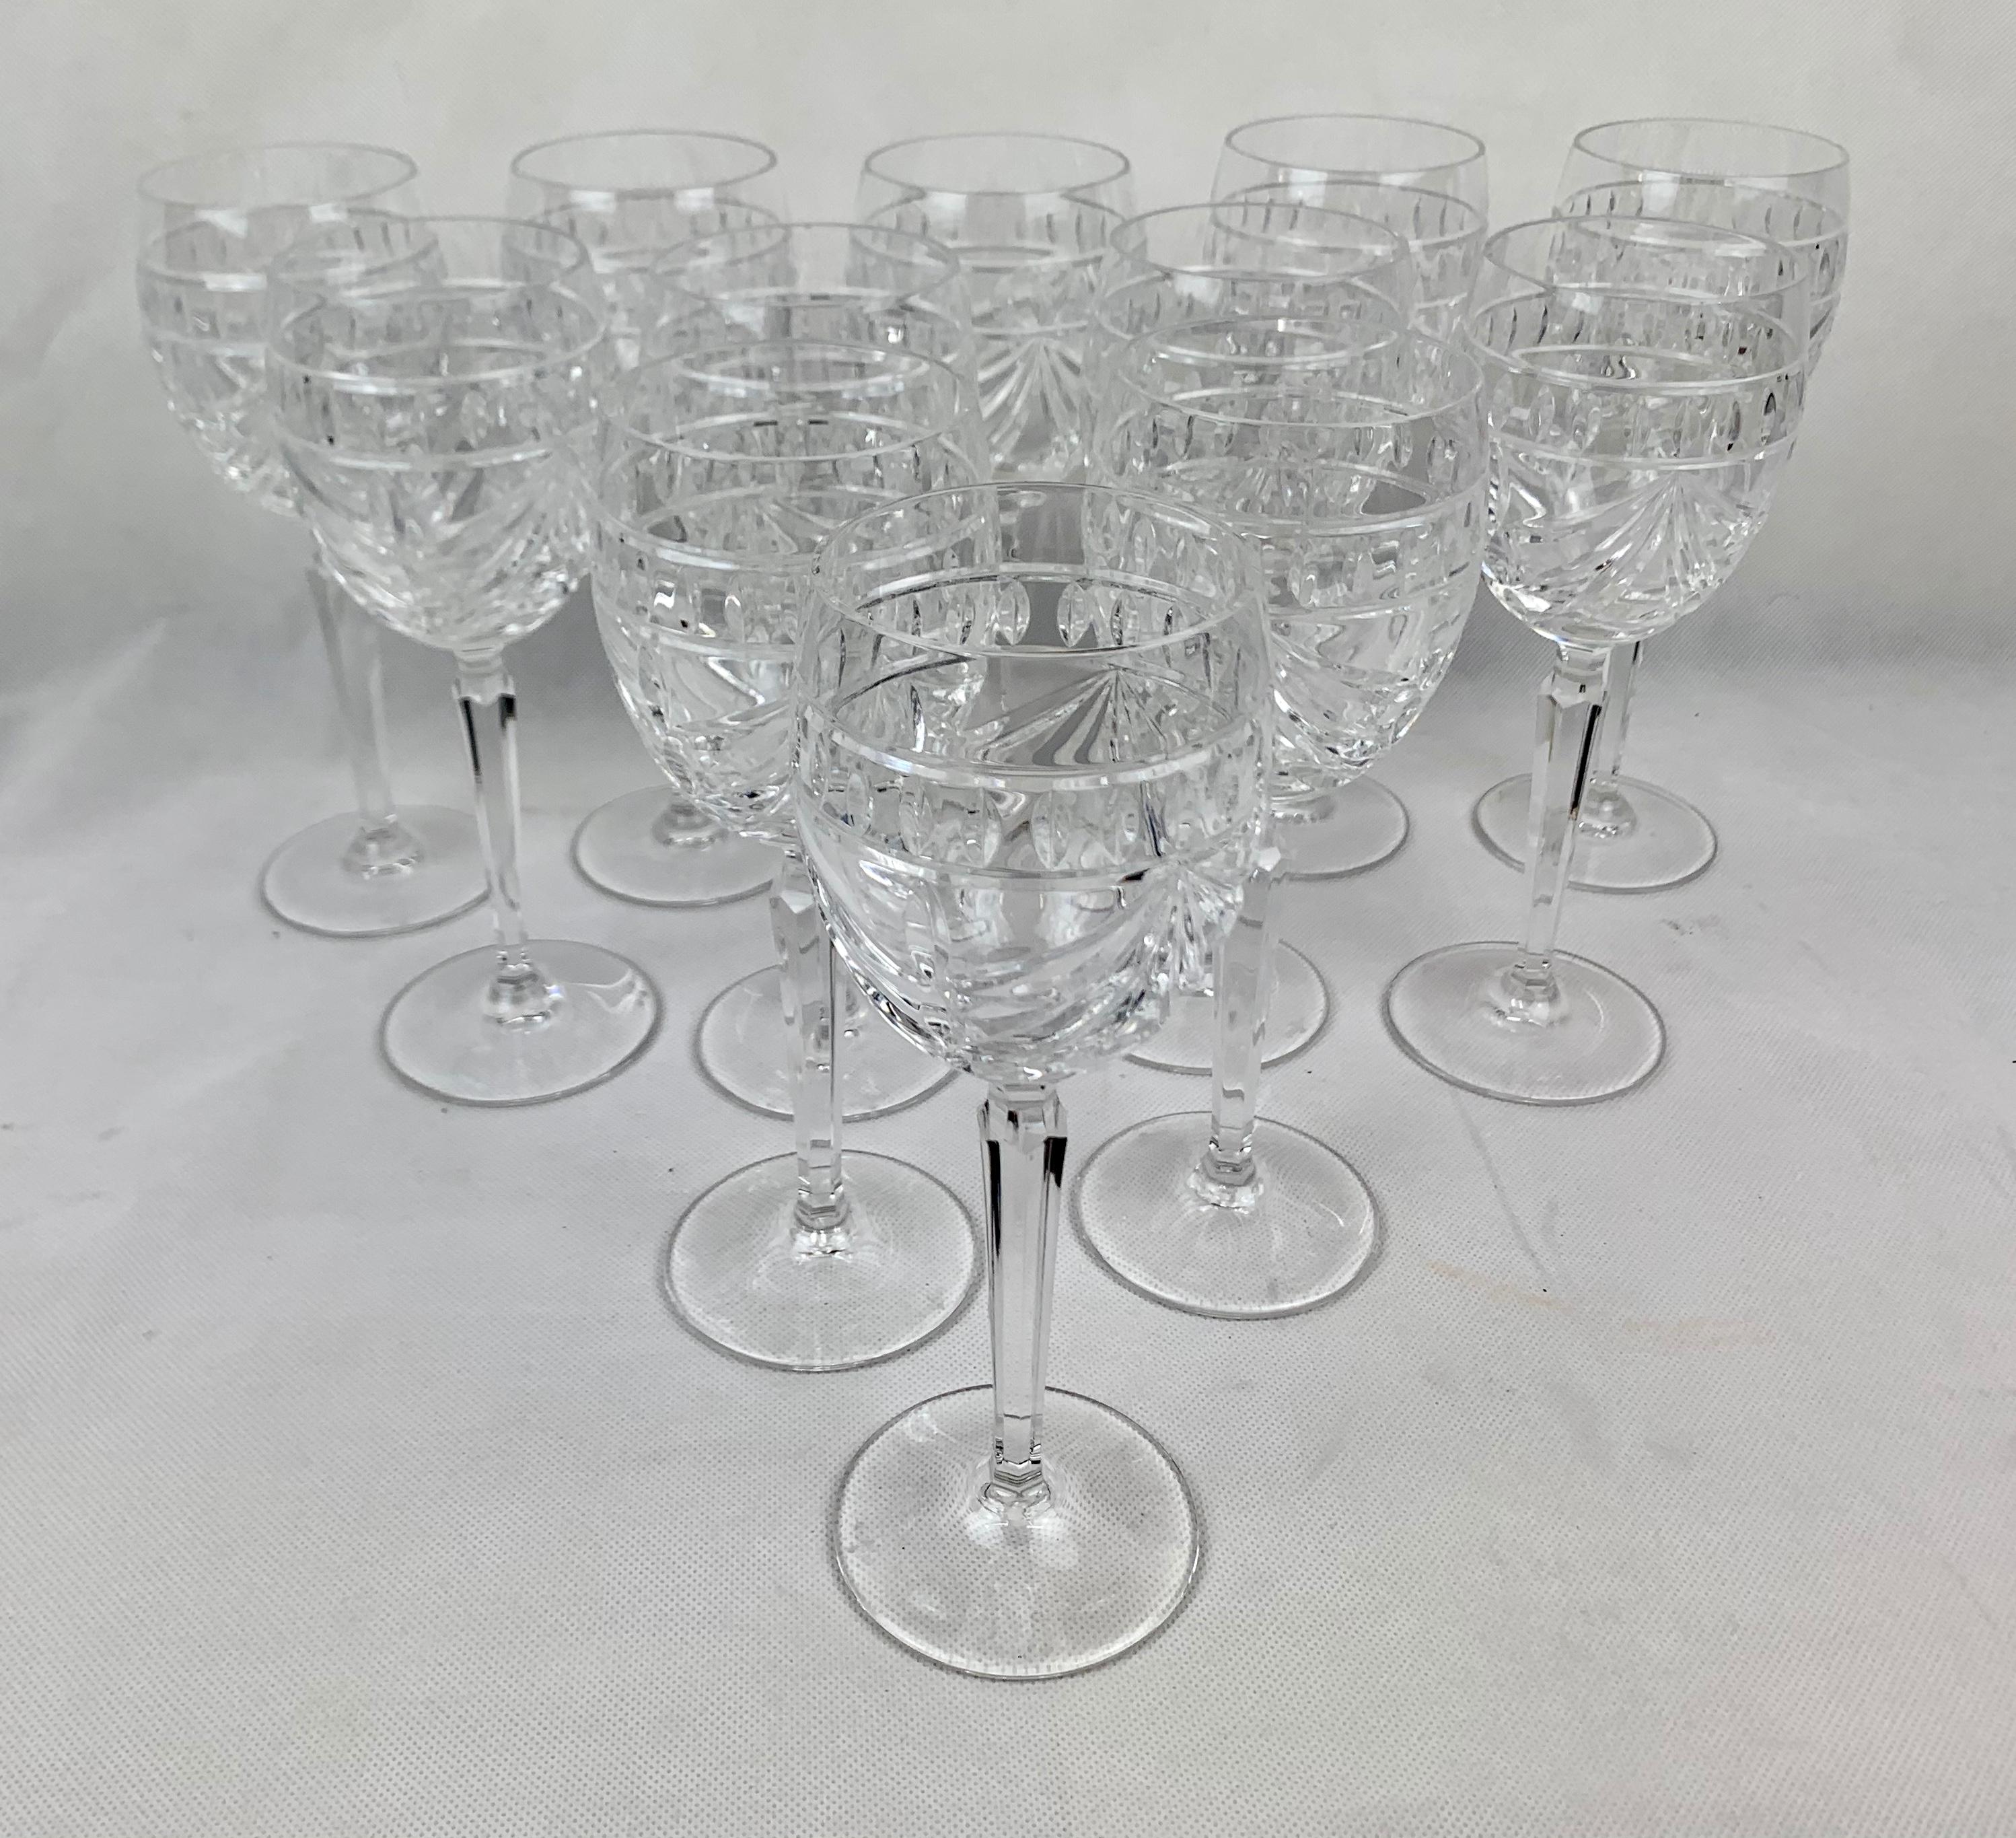 Set of 12 crystal Waterford wine glasses in the 